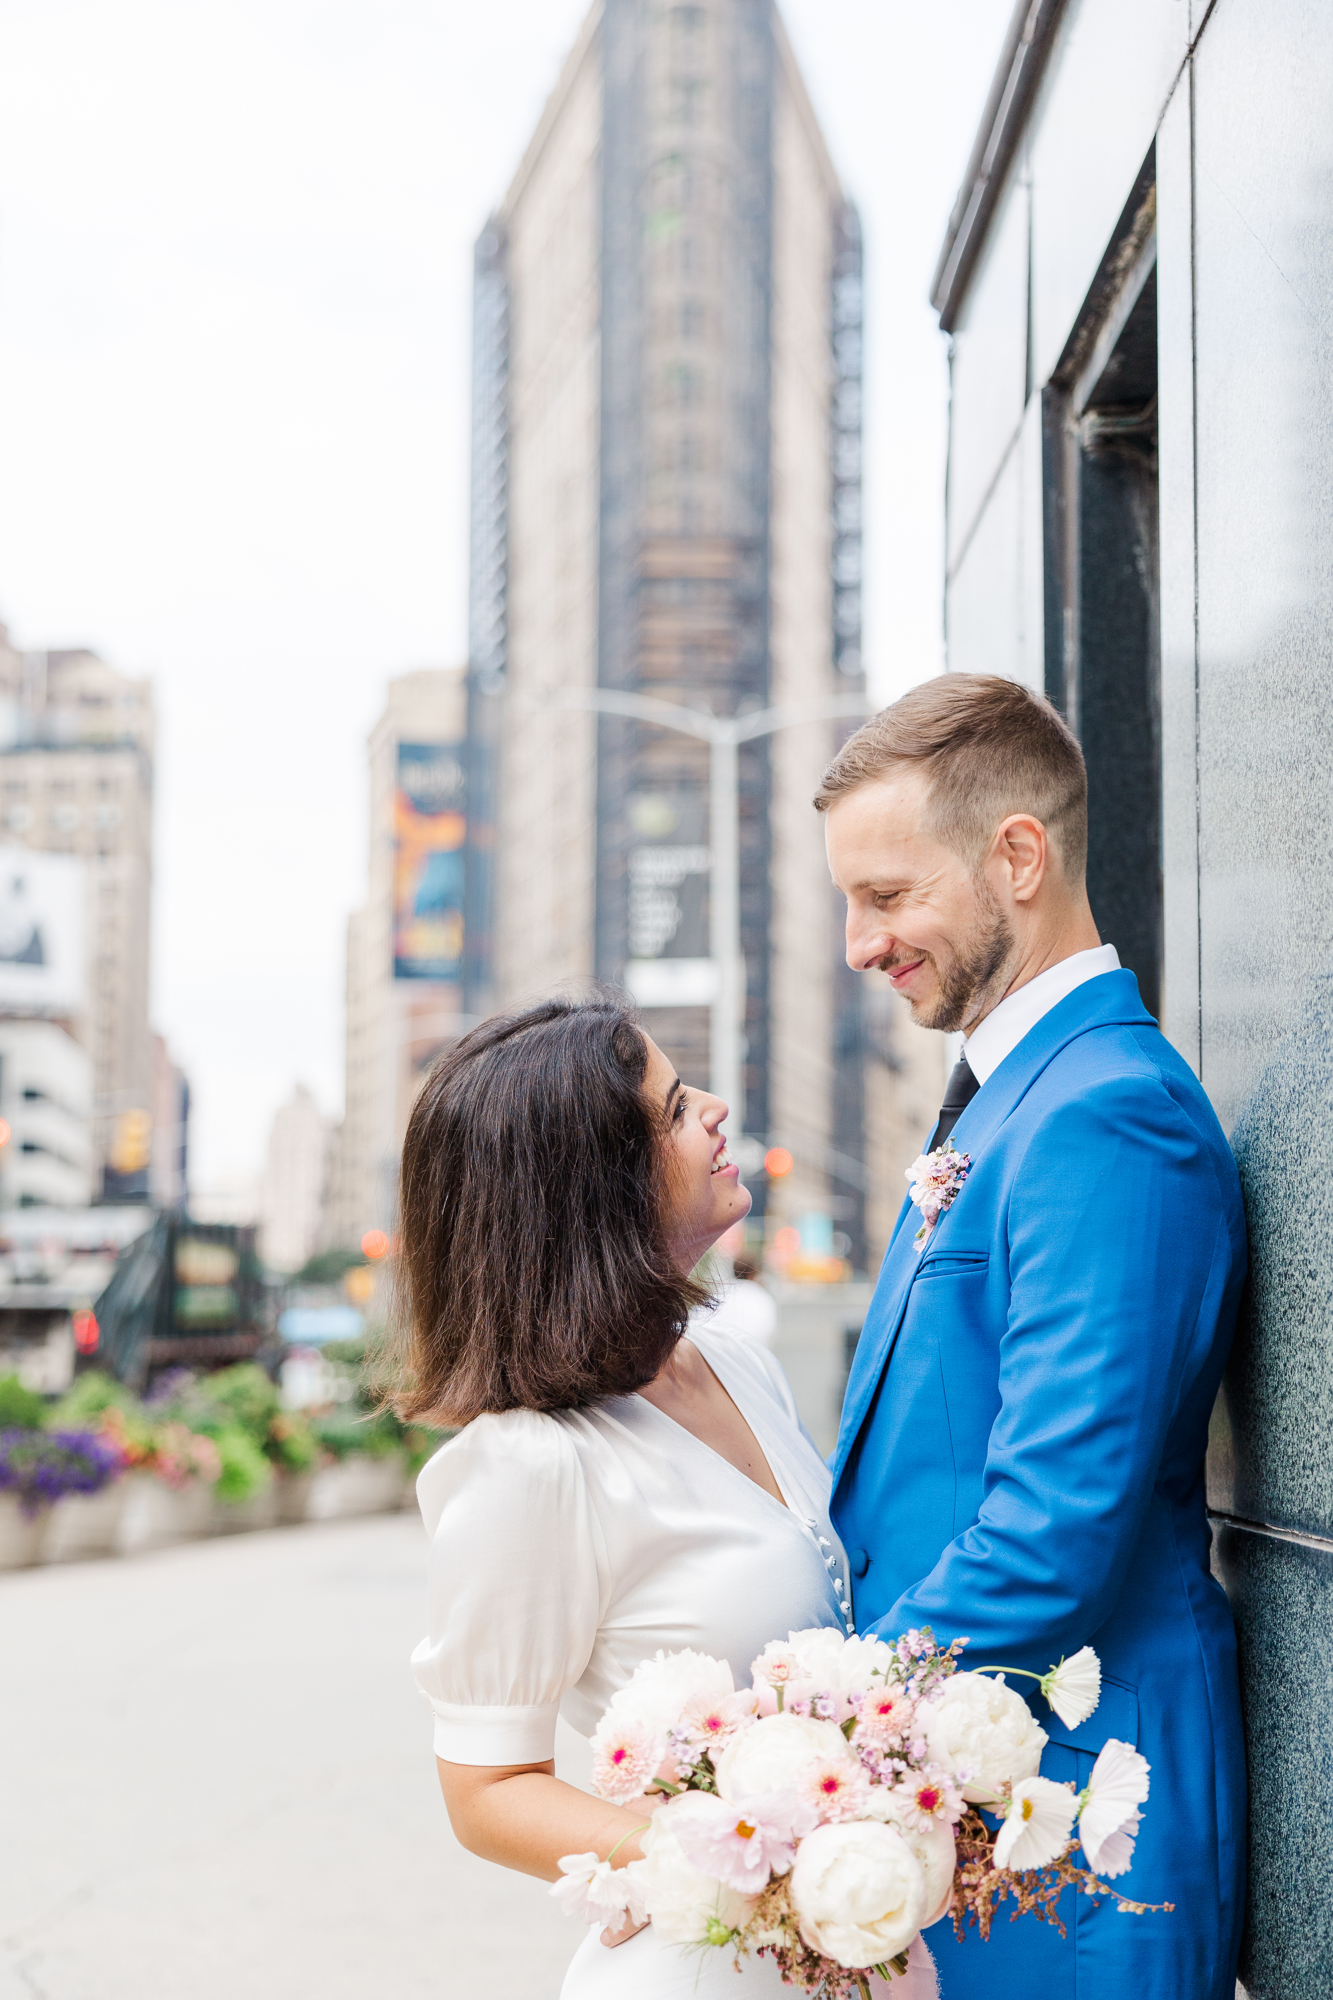 The Cost of NYC Photographers for an Awesome Elopement